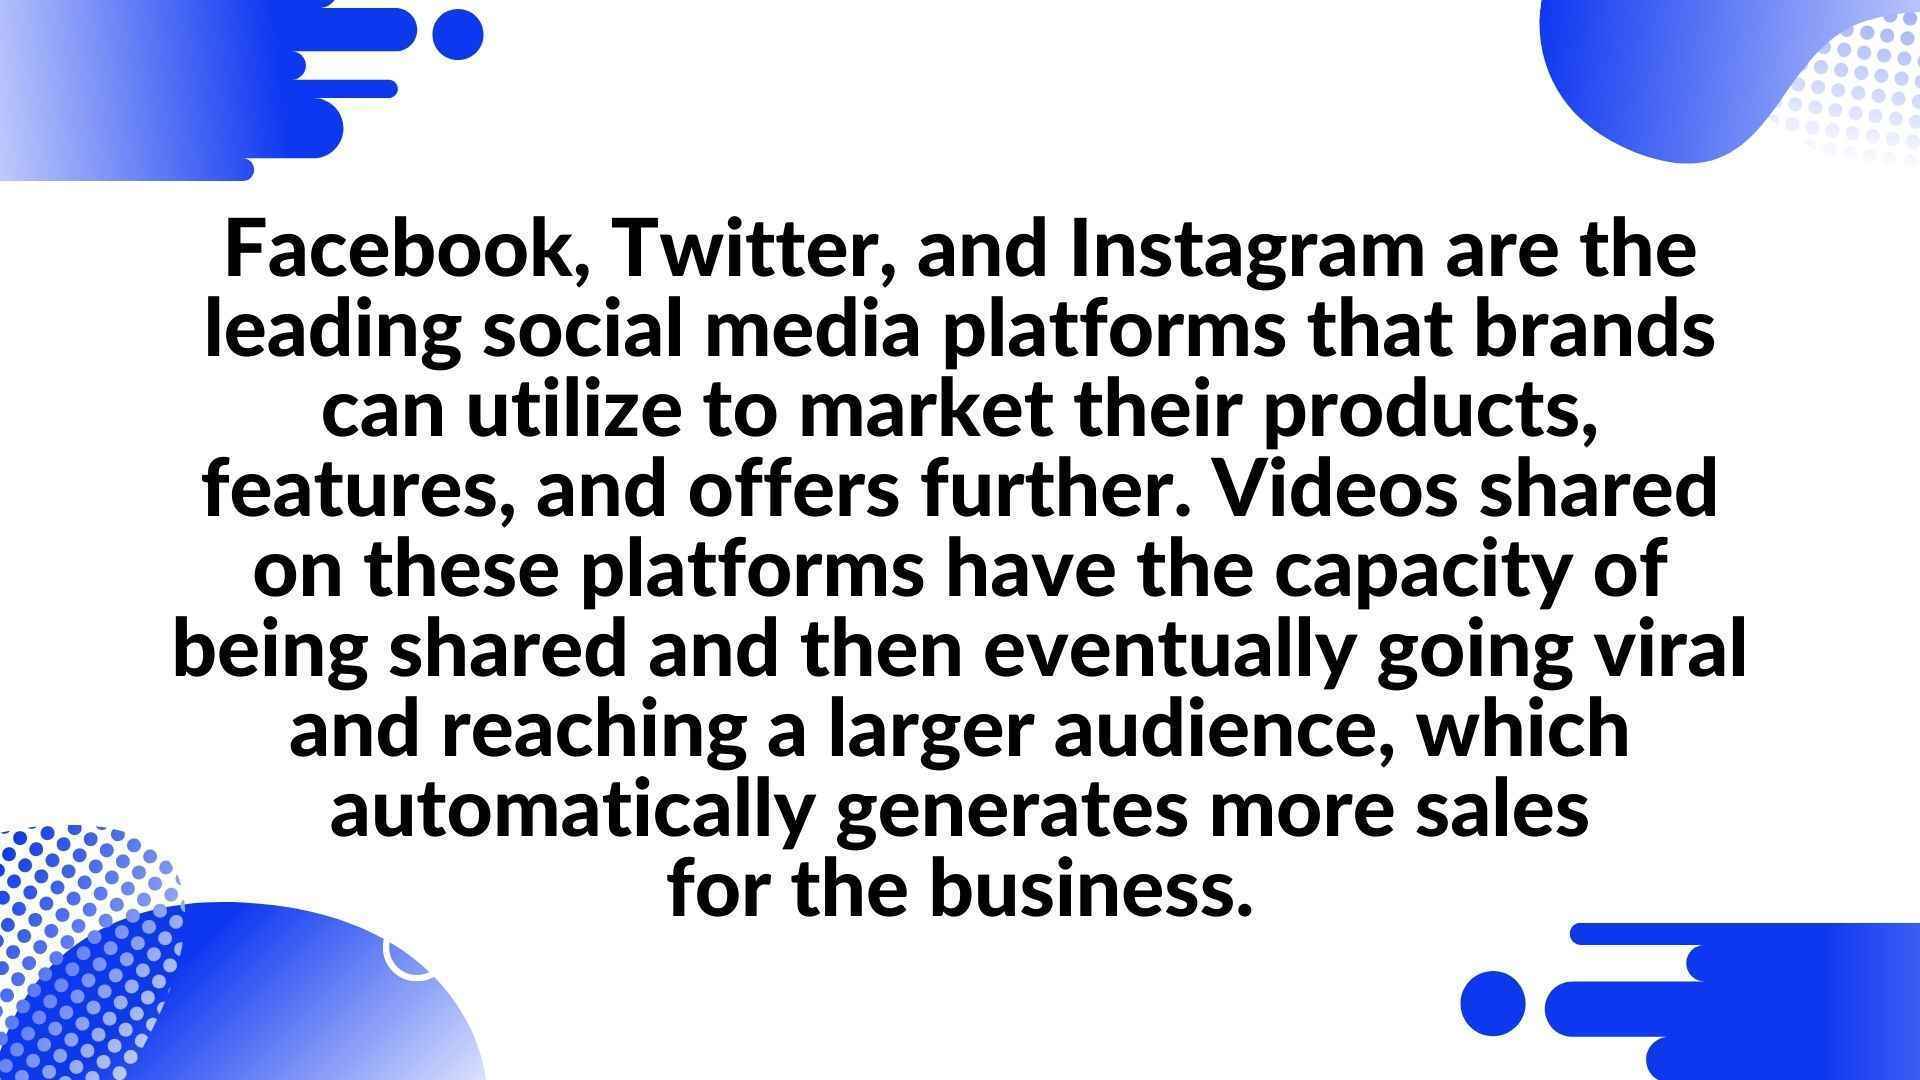 Facebook, Twitter, and Instagram are the leading social media platforms that brands can utilize to market their products, features, and offers further